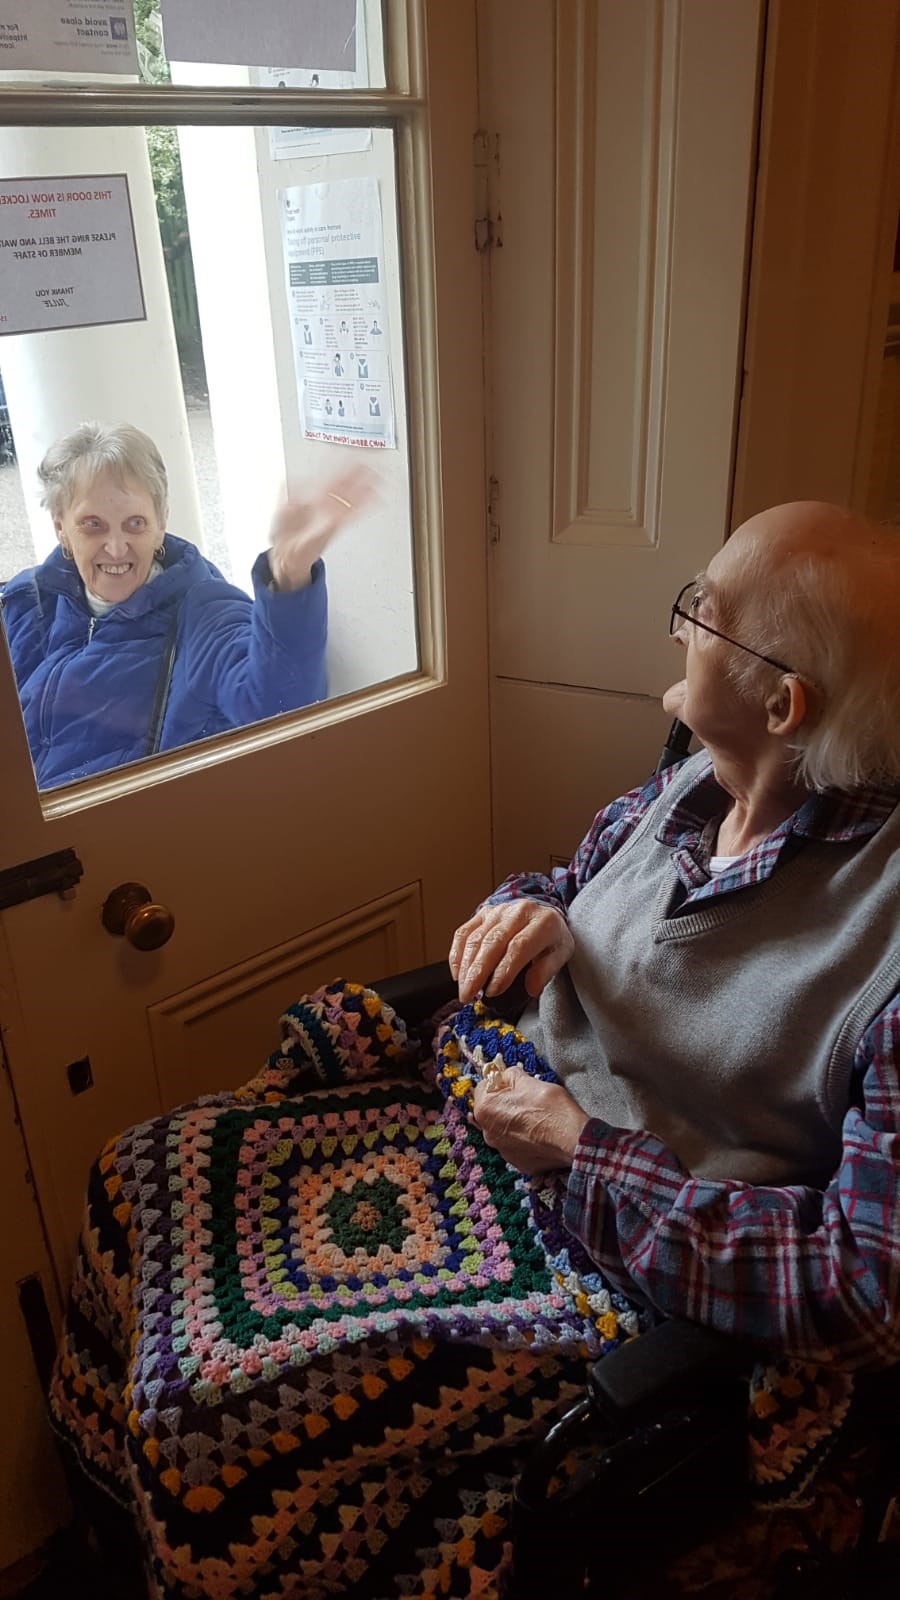 A Window Visit From Loved Ones - 06.02.21